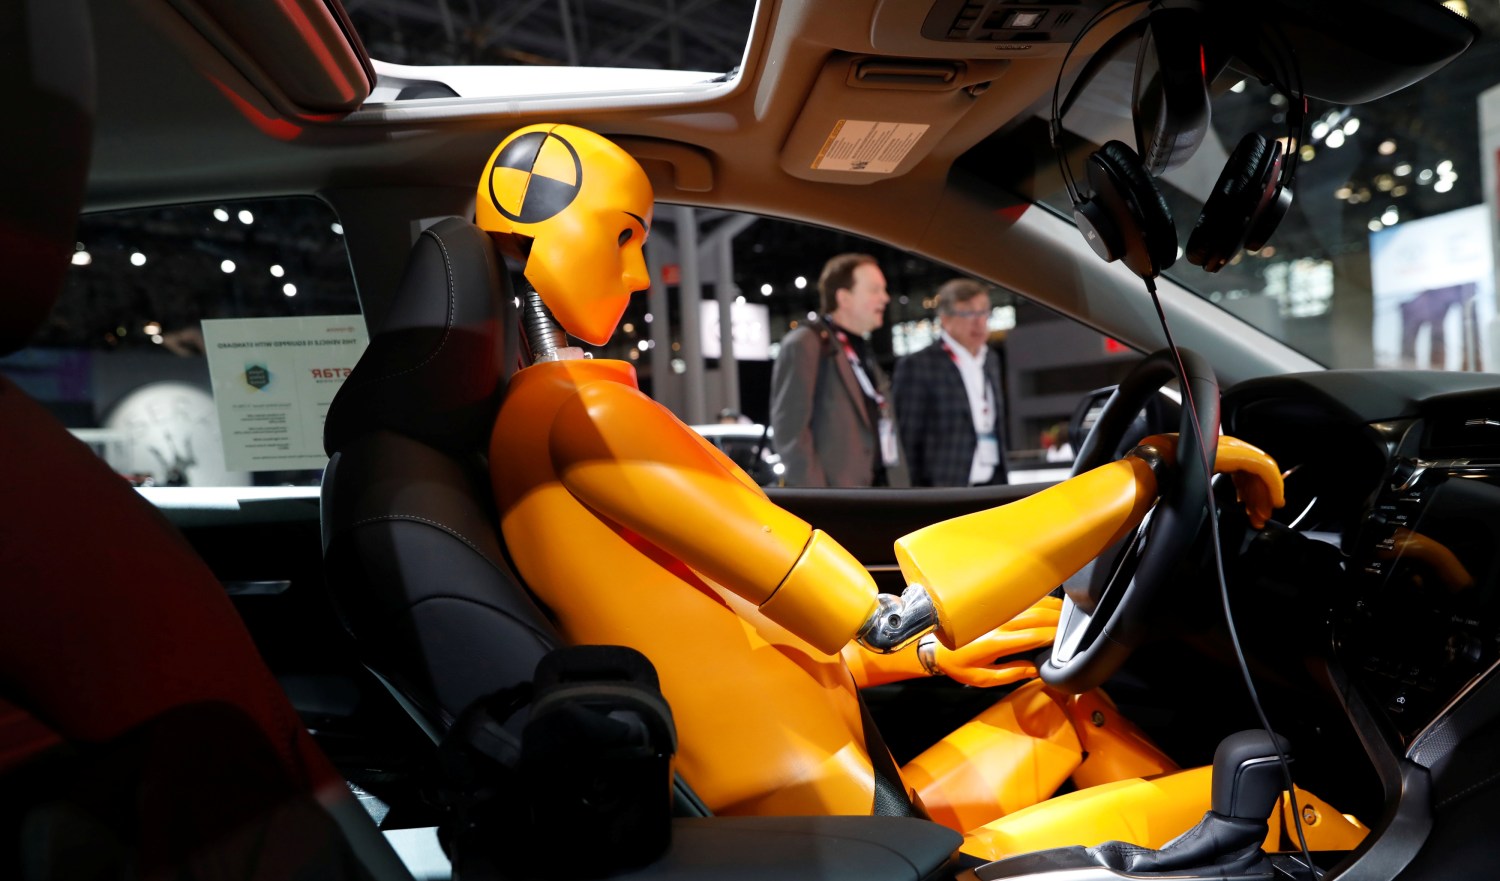 A crash test model is displayed inside a 2018 Toyota Camry on the floor of the New York Auto Show in the Manhattan borough of New York City, New York, U.S., March 29, 2018. REUTERS/Shannon Stapleton     TPX IMAGES OF THE DAY - RC1C93154D10